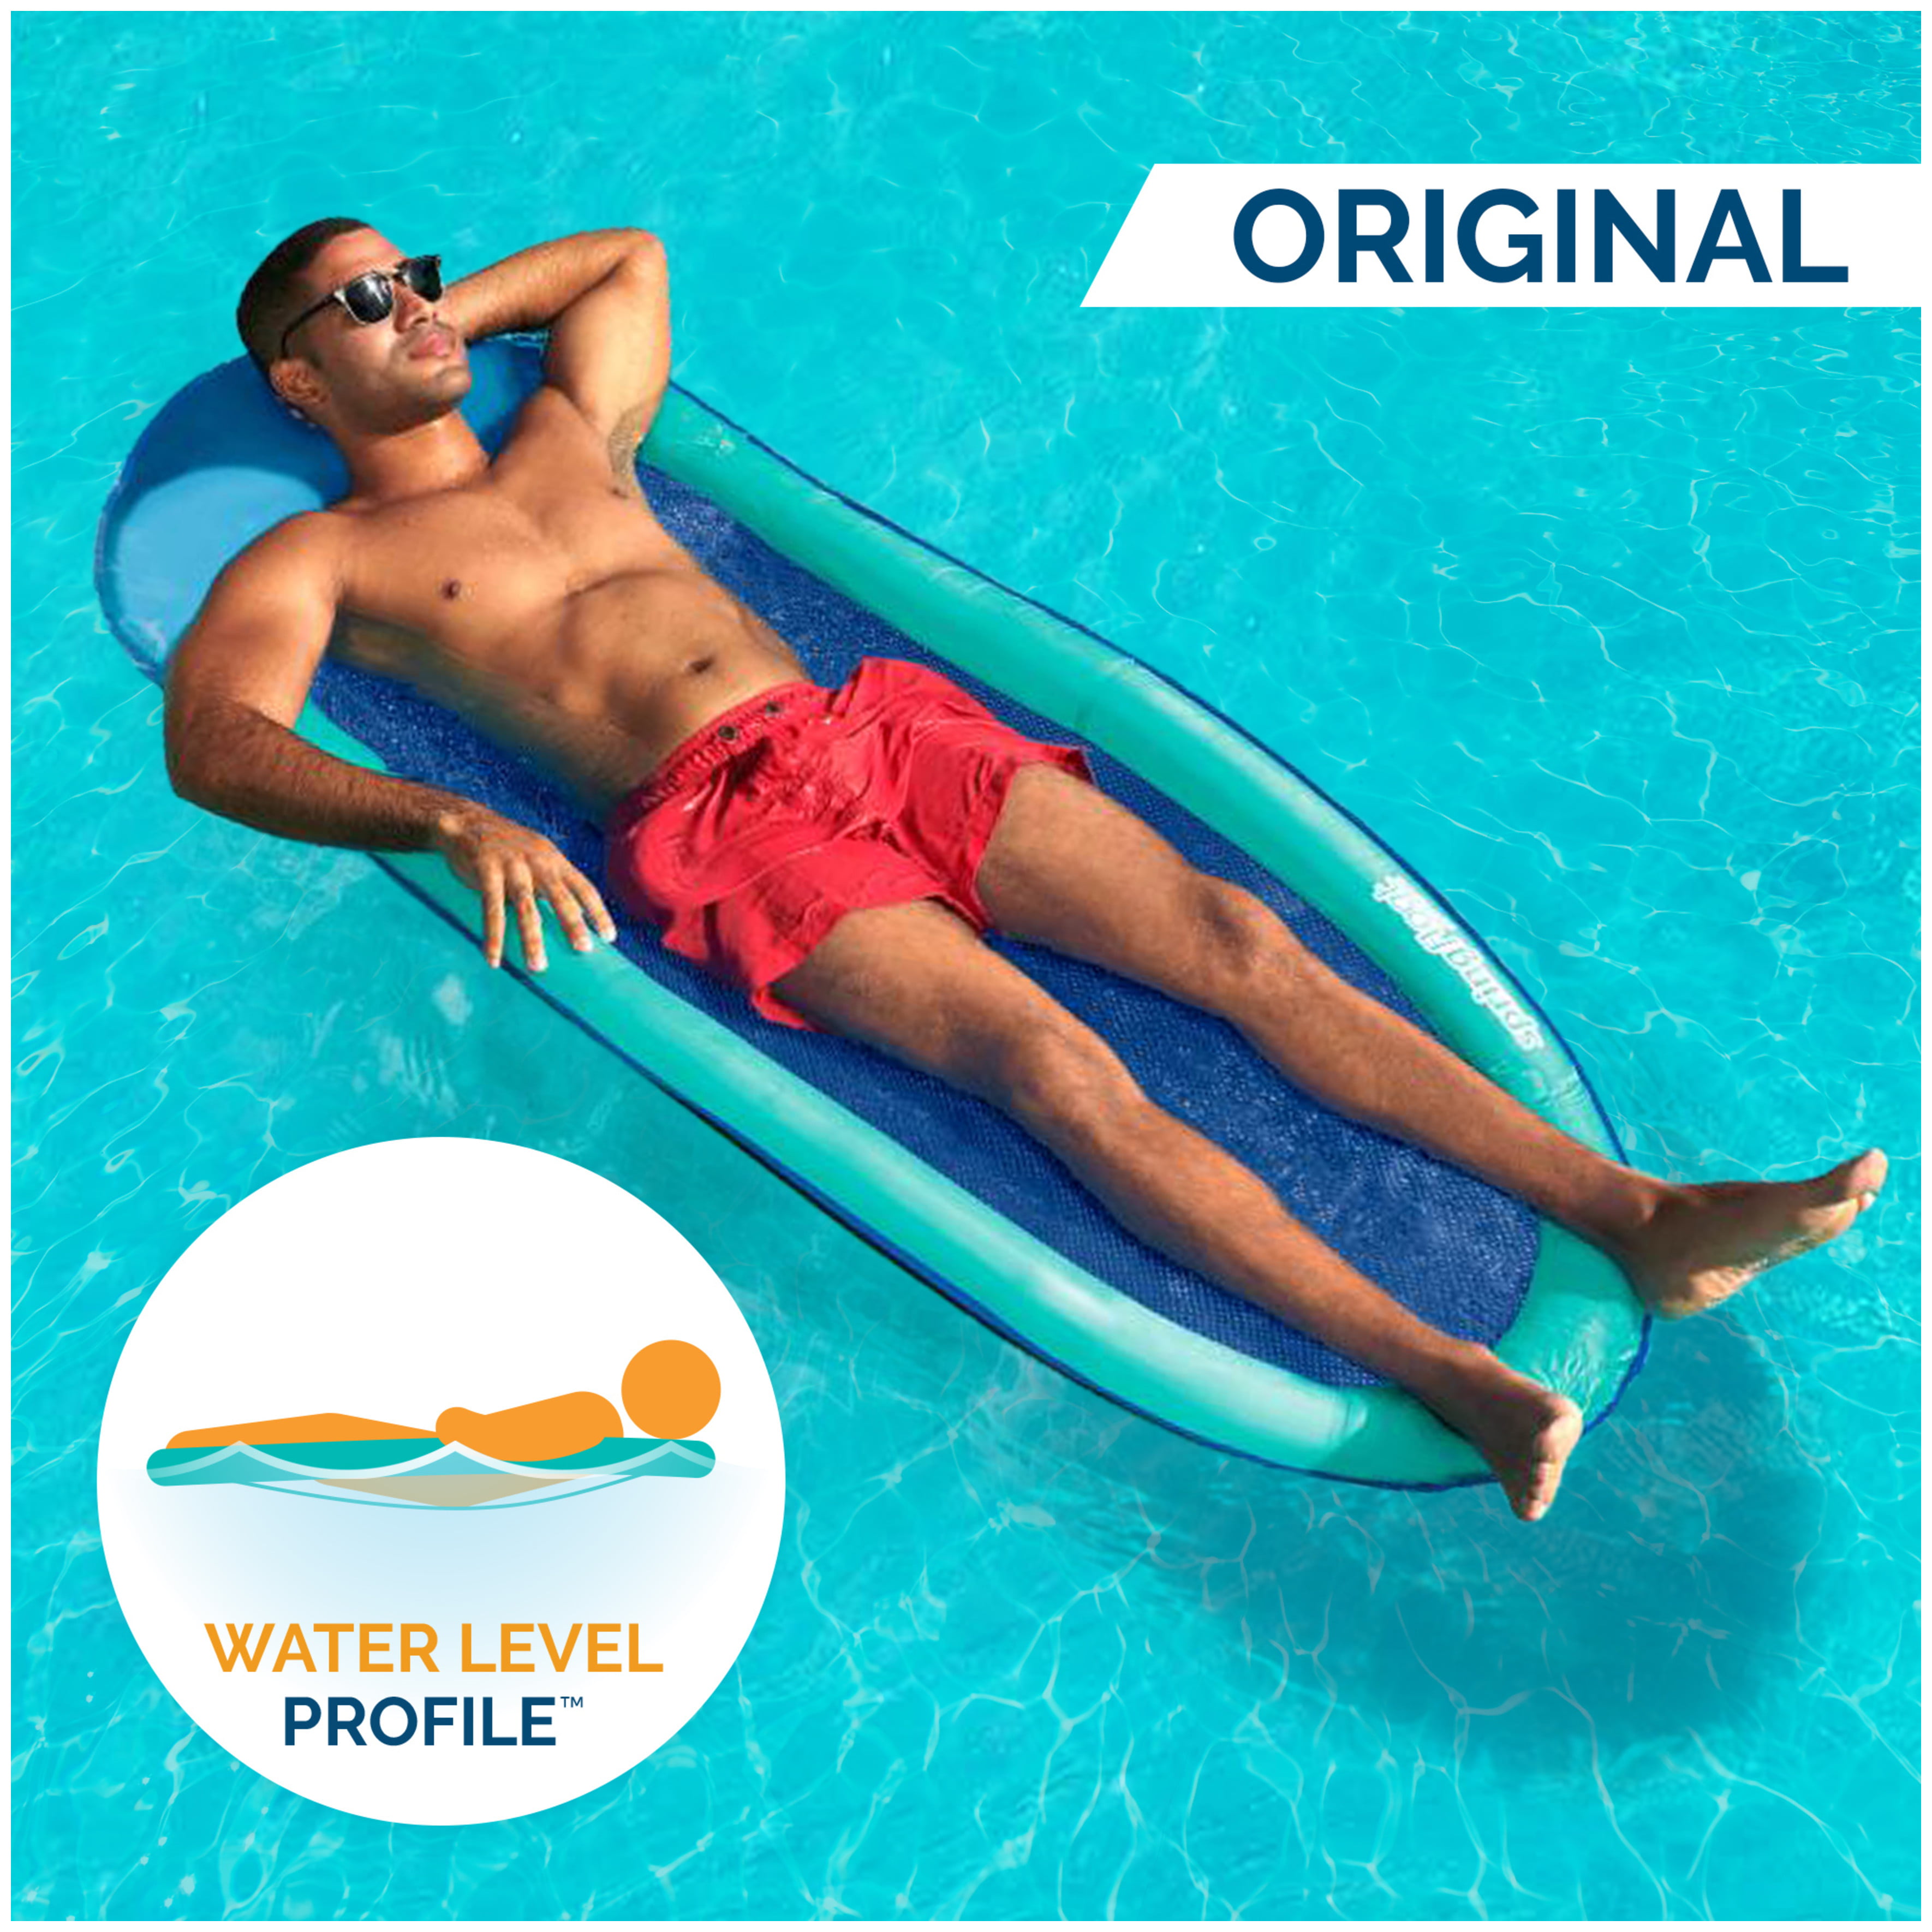 SwimWays Spring Float Inflatable Pool Lounger with Hyper-Flate Valve, Aqua - image 5 of 8